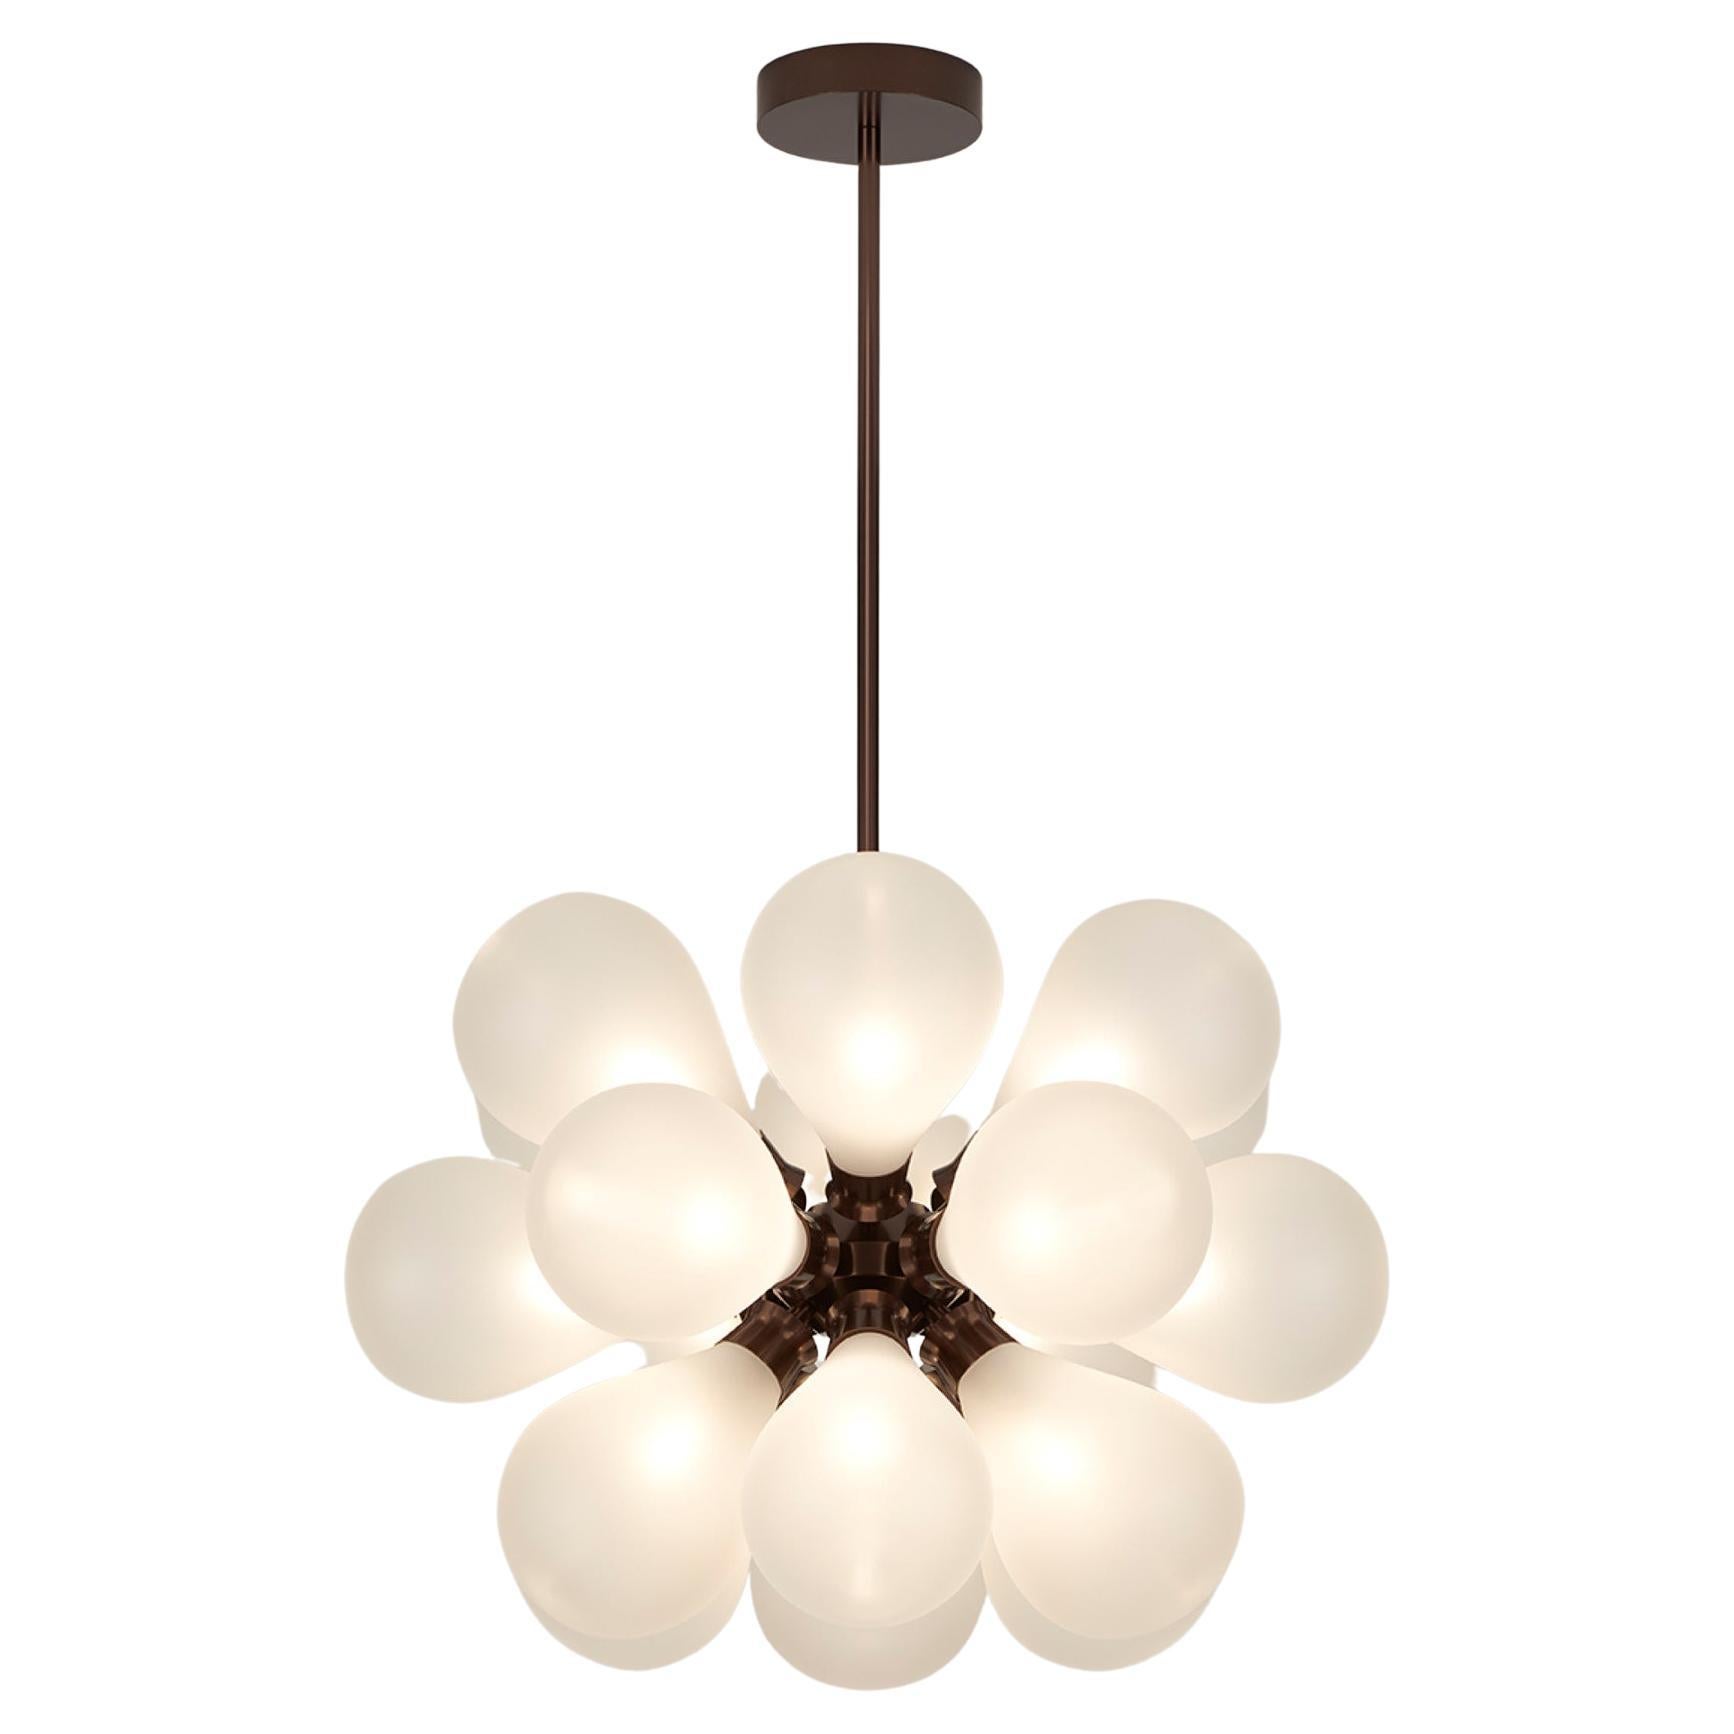 Cintola Maxi Pendant in Satin Bronze with 18 Handblown Frosted Glass Globes